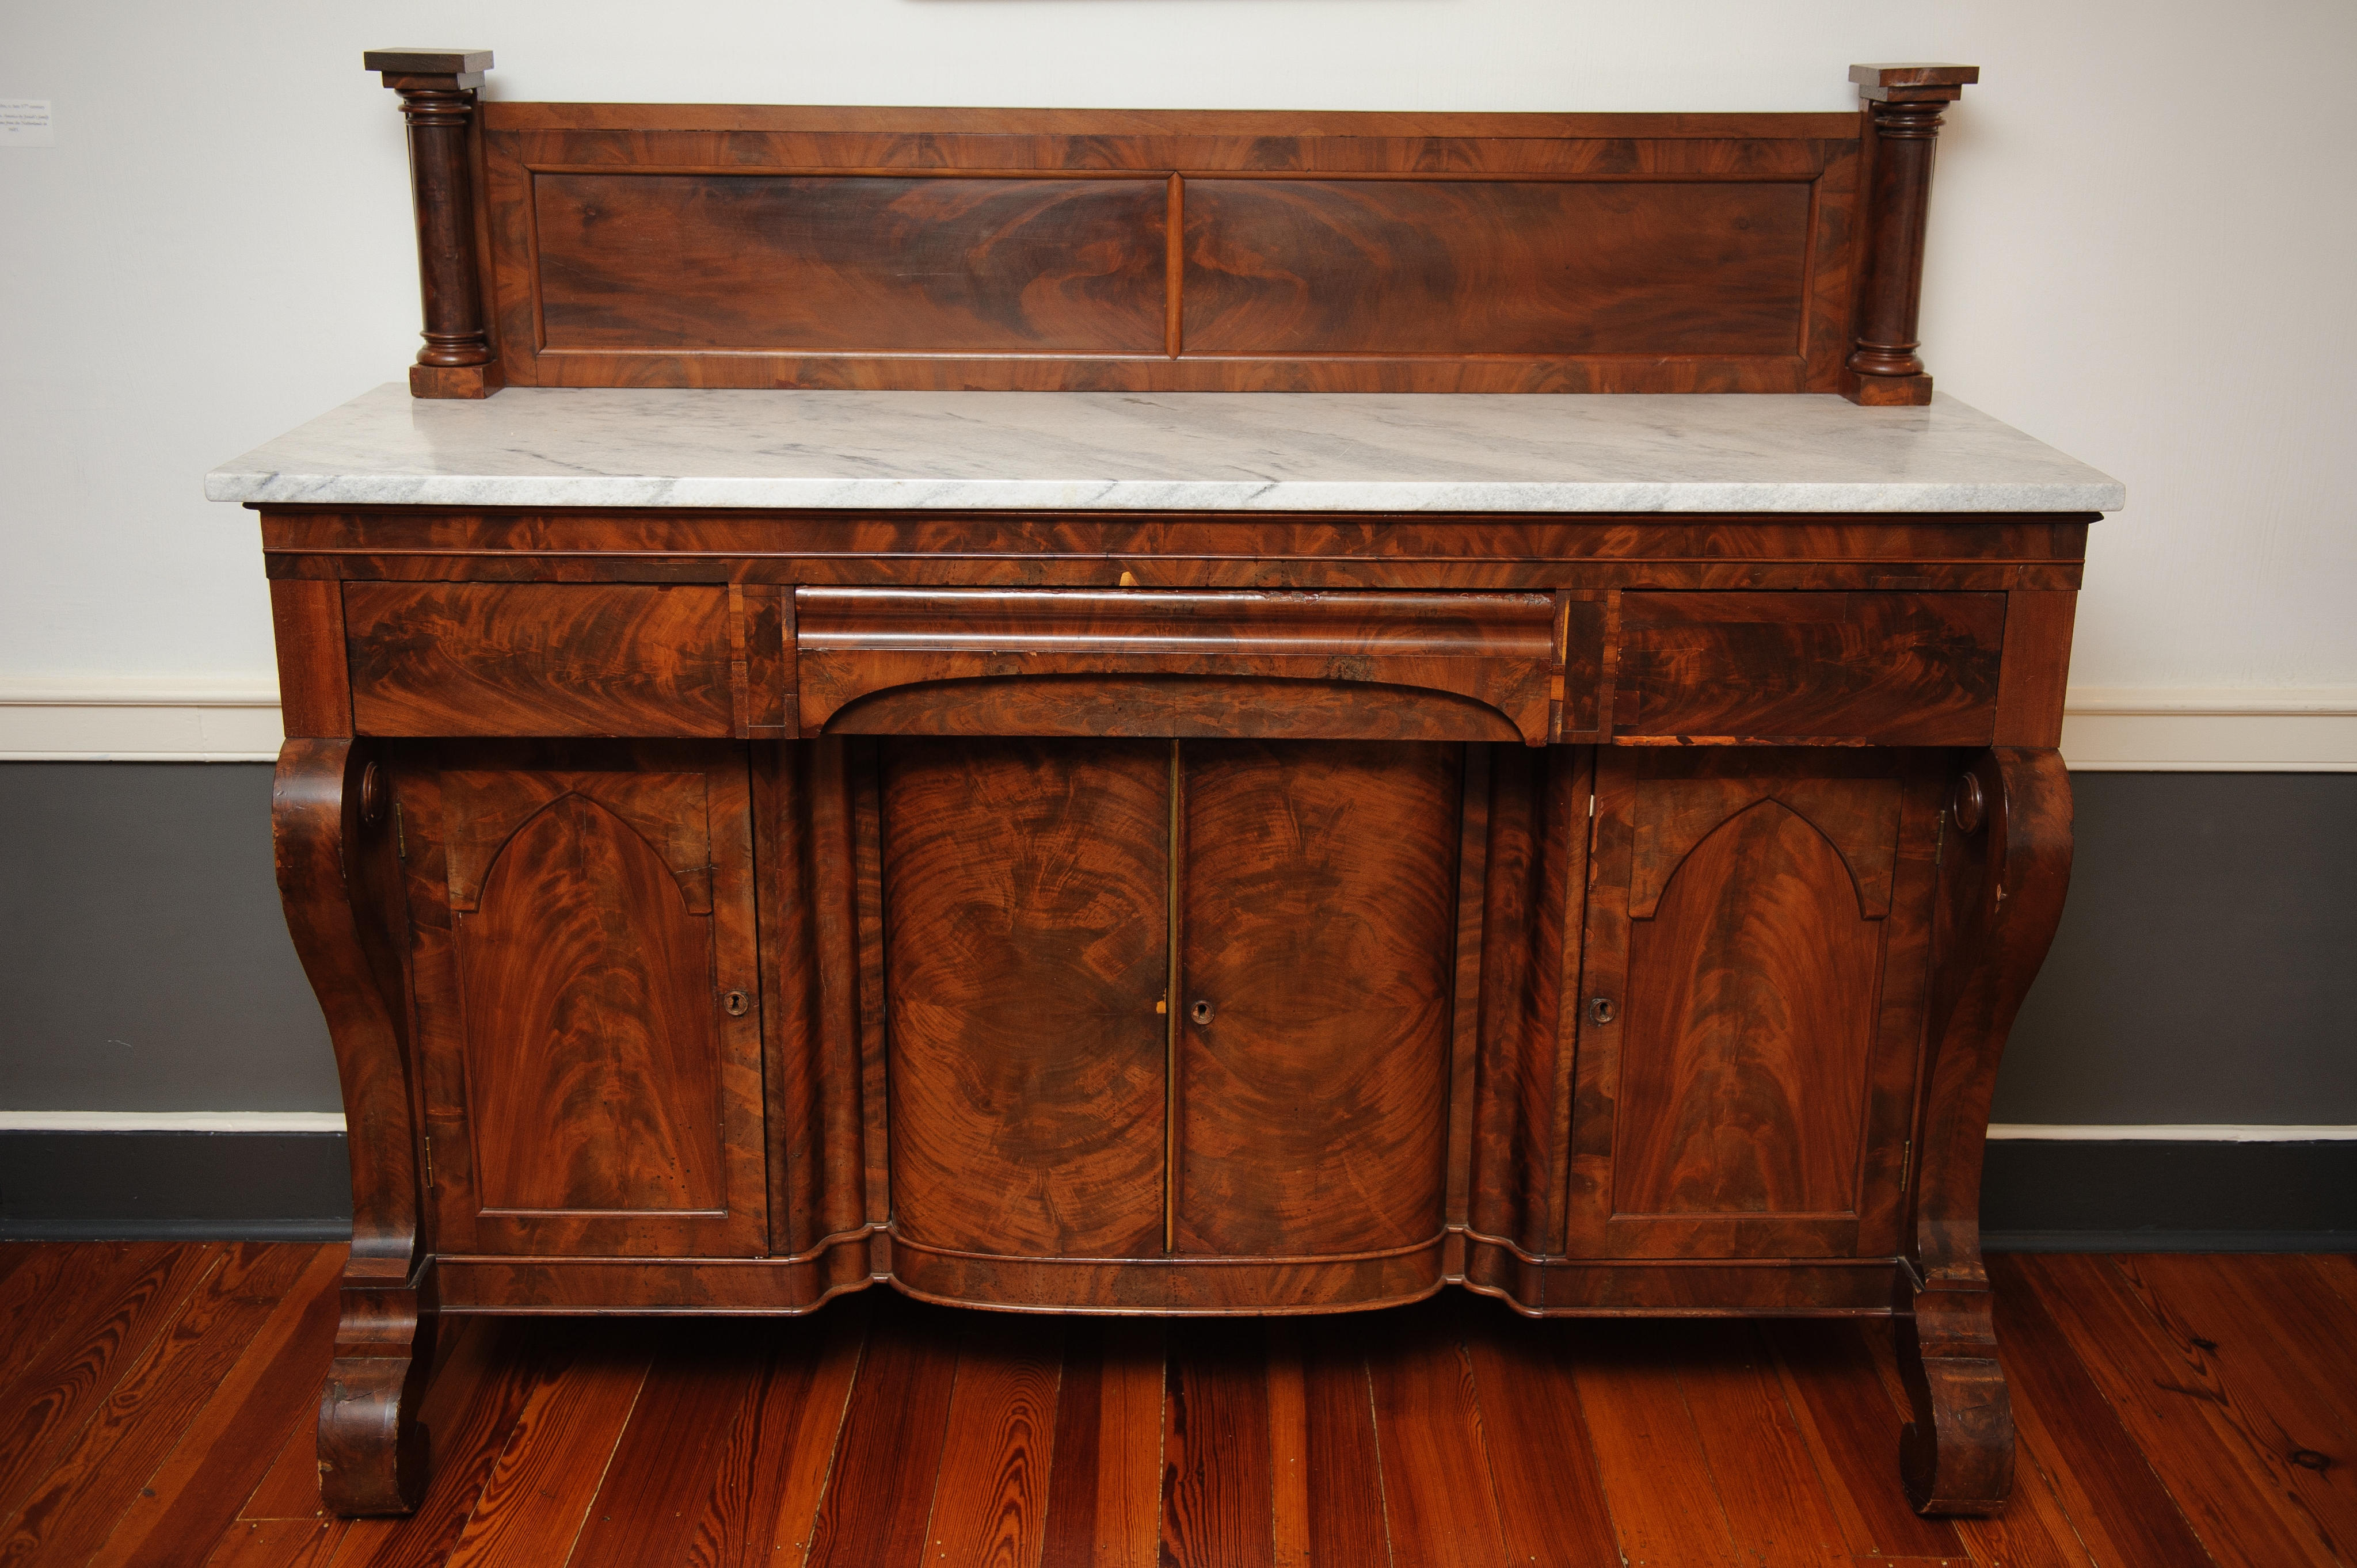 UA Museums’ Collections Spotlight: Gayle Family American Empire Sideboard